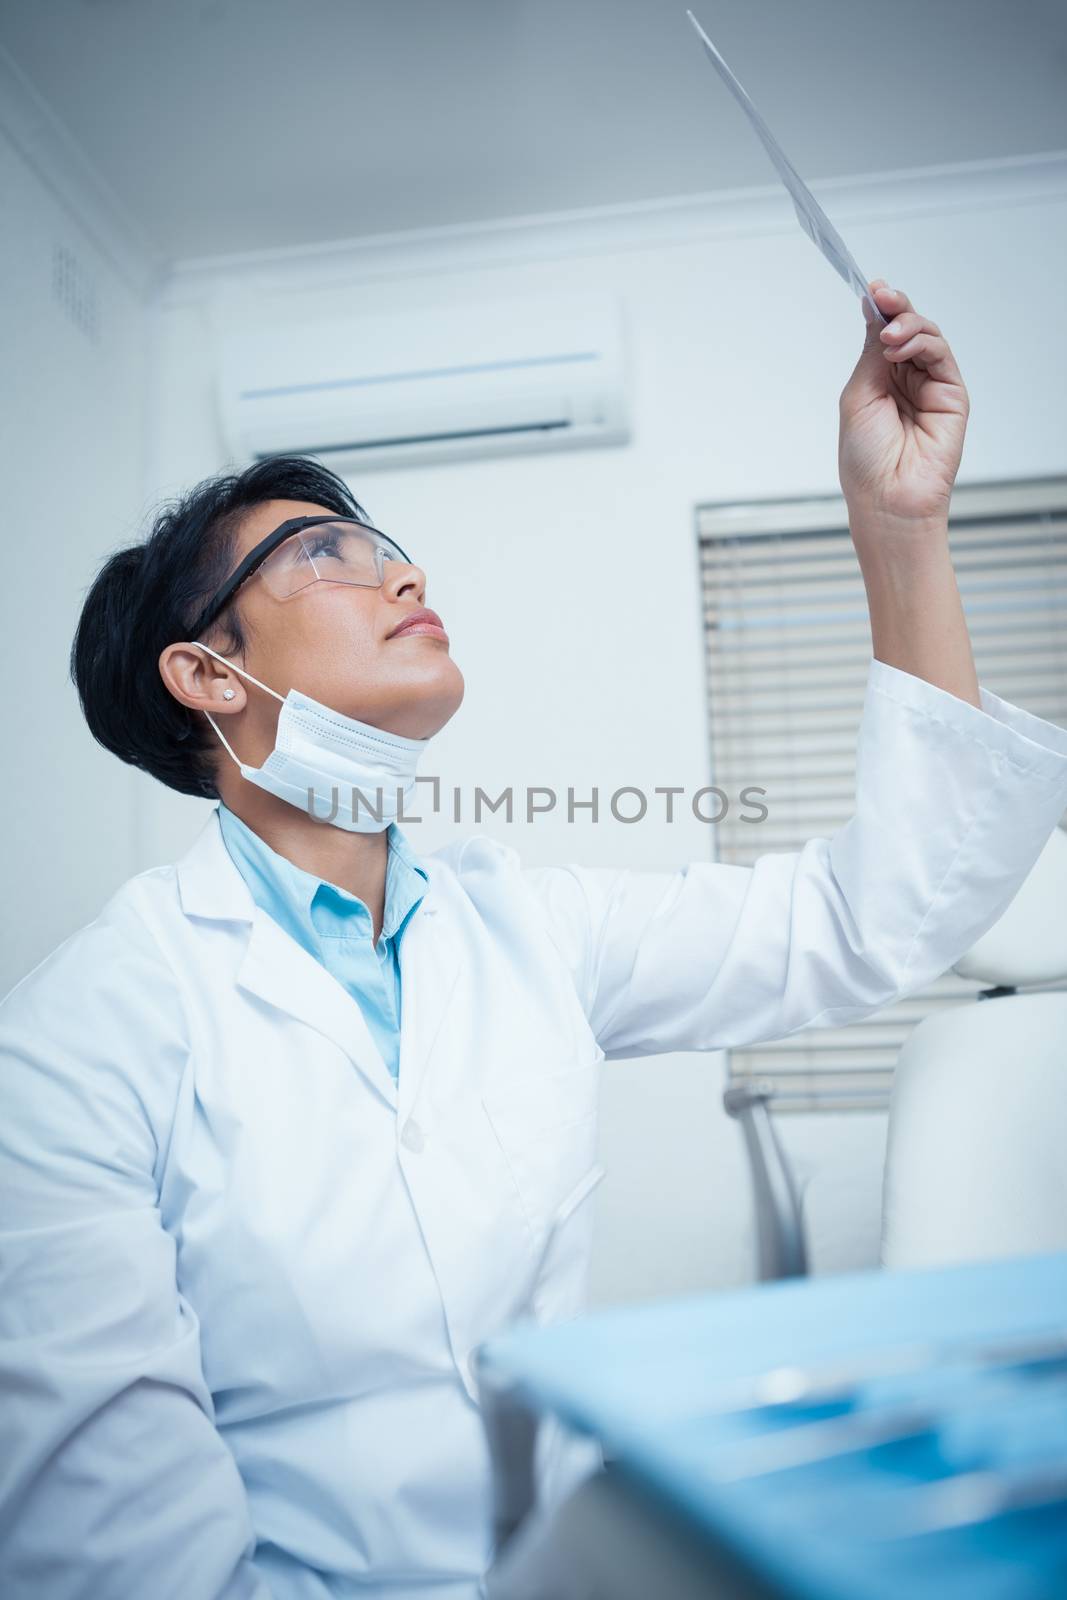 Low angle view of concentrated young female dentist looking at x-ray